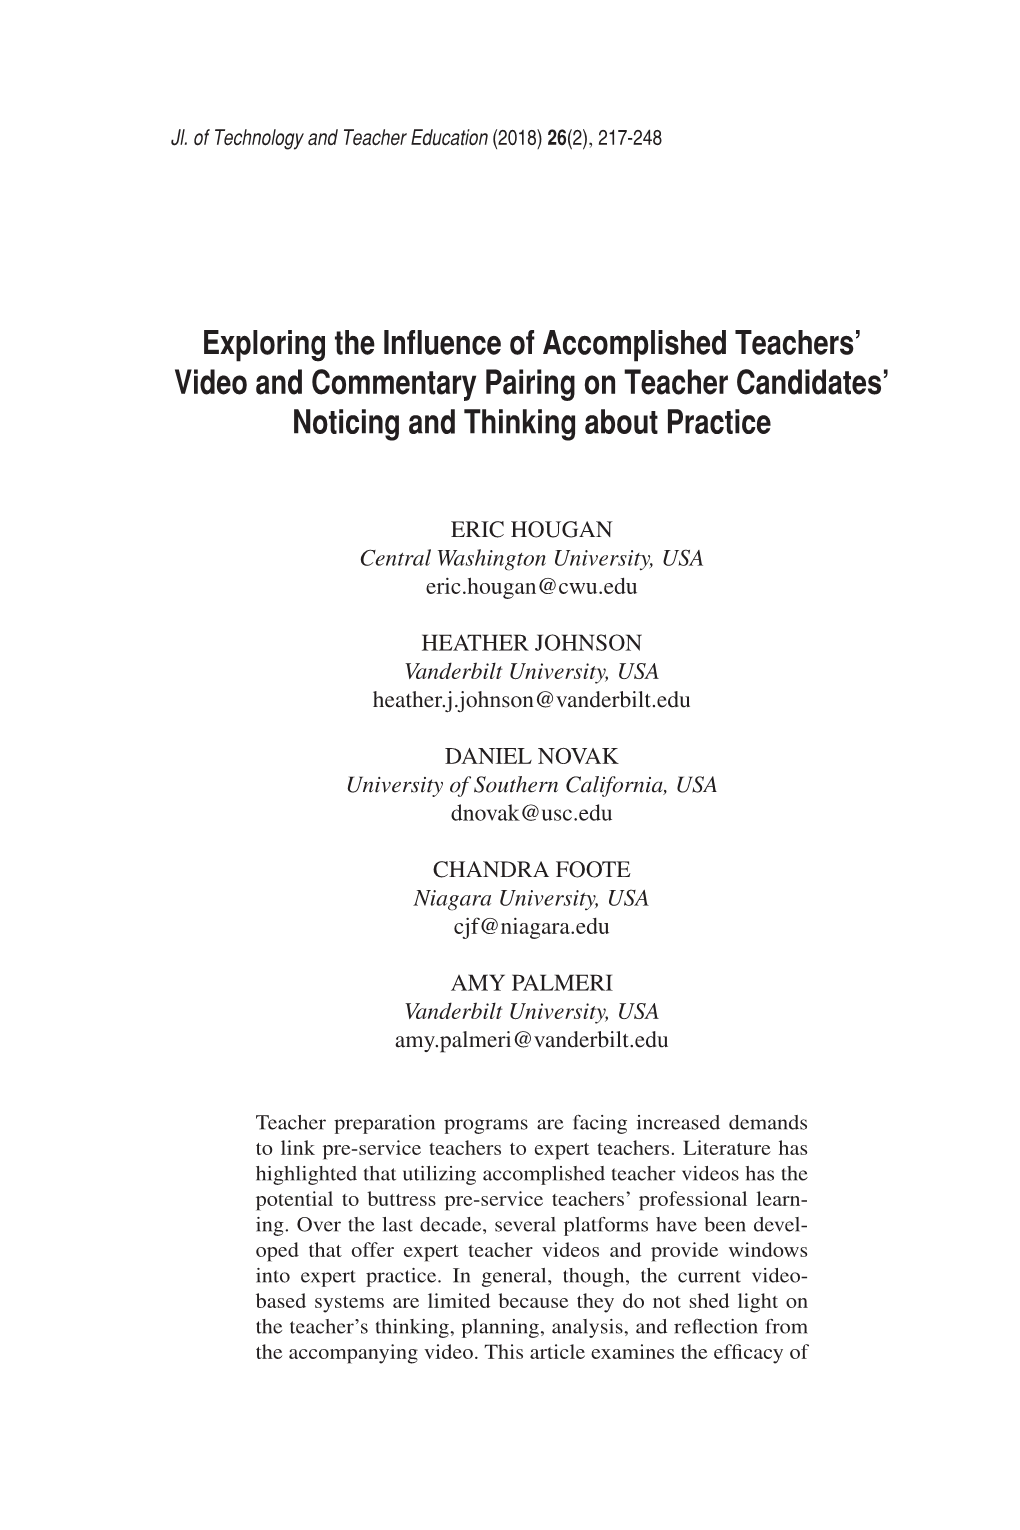 Exploring the Influence of Accomplished Teachers' Video and Commentary Pairing on Teacher Candidates' Noticing and Thinking